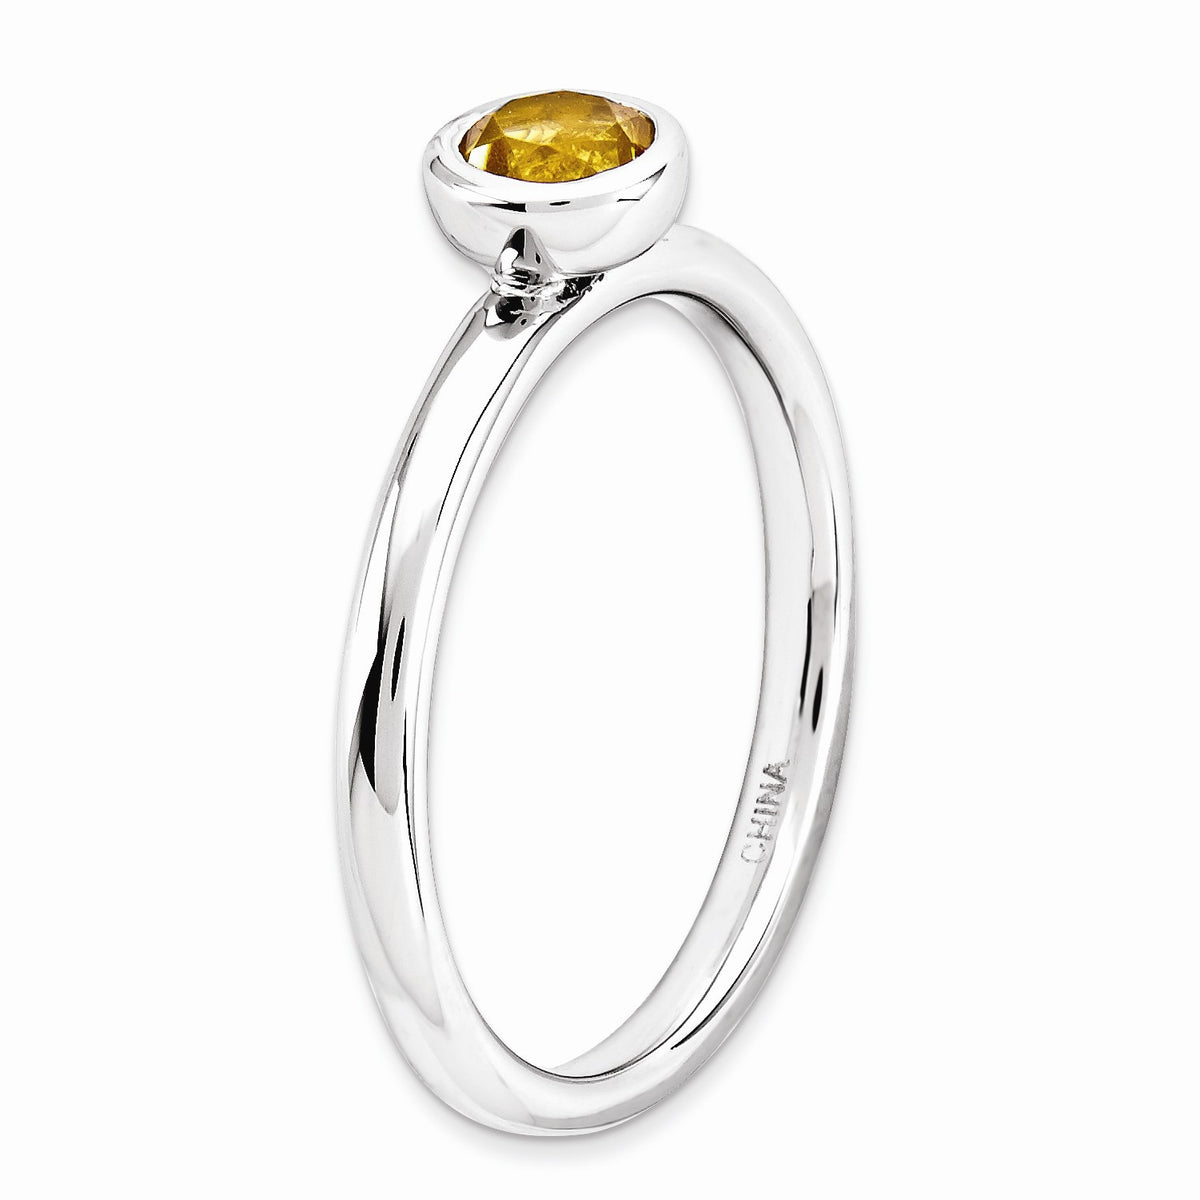 Alternate view of the Stackable Low Profile 5mm Citrine Silver Ring by The Black Bow Jewelry Co.